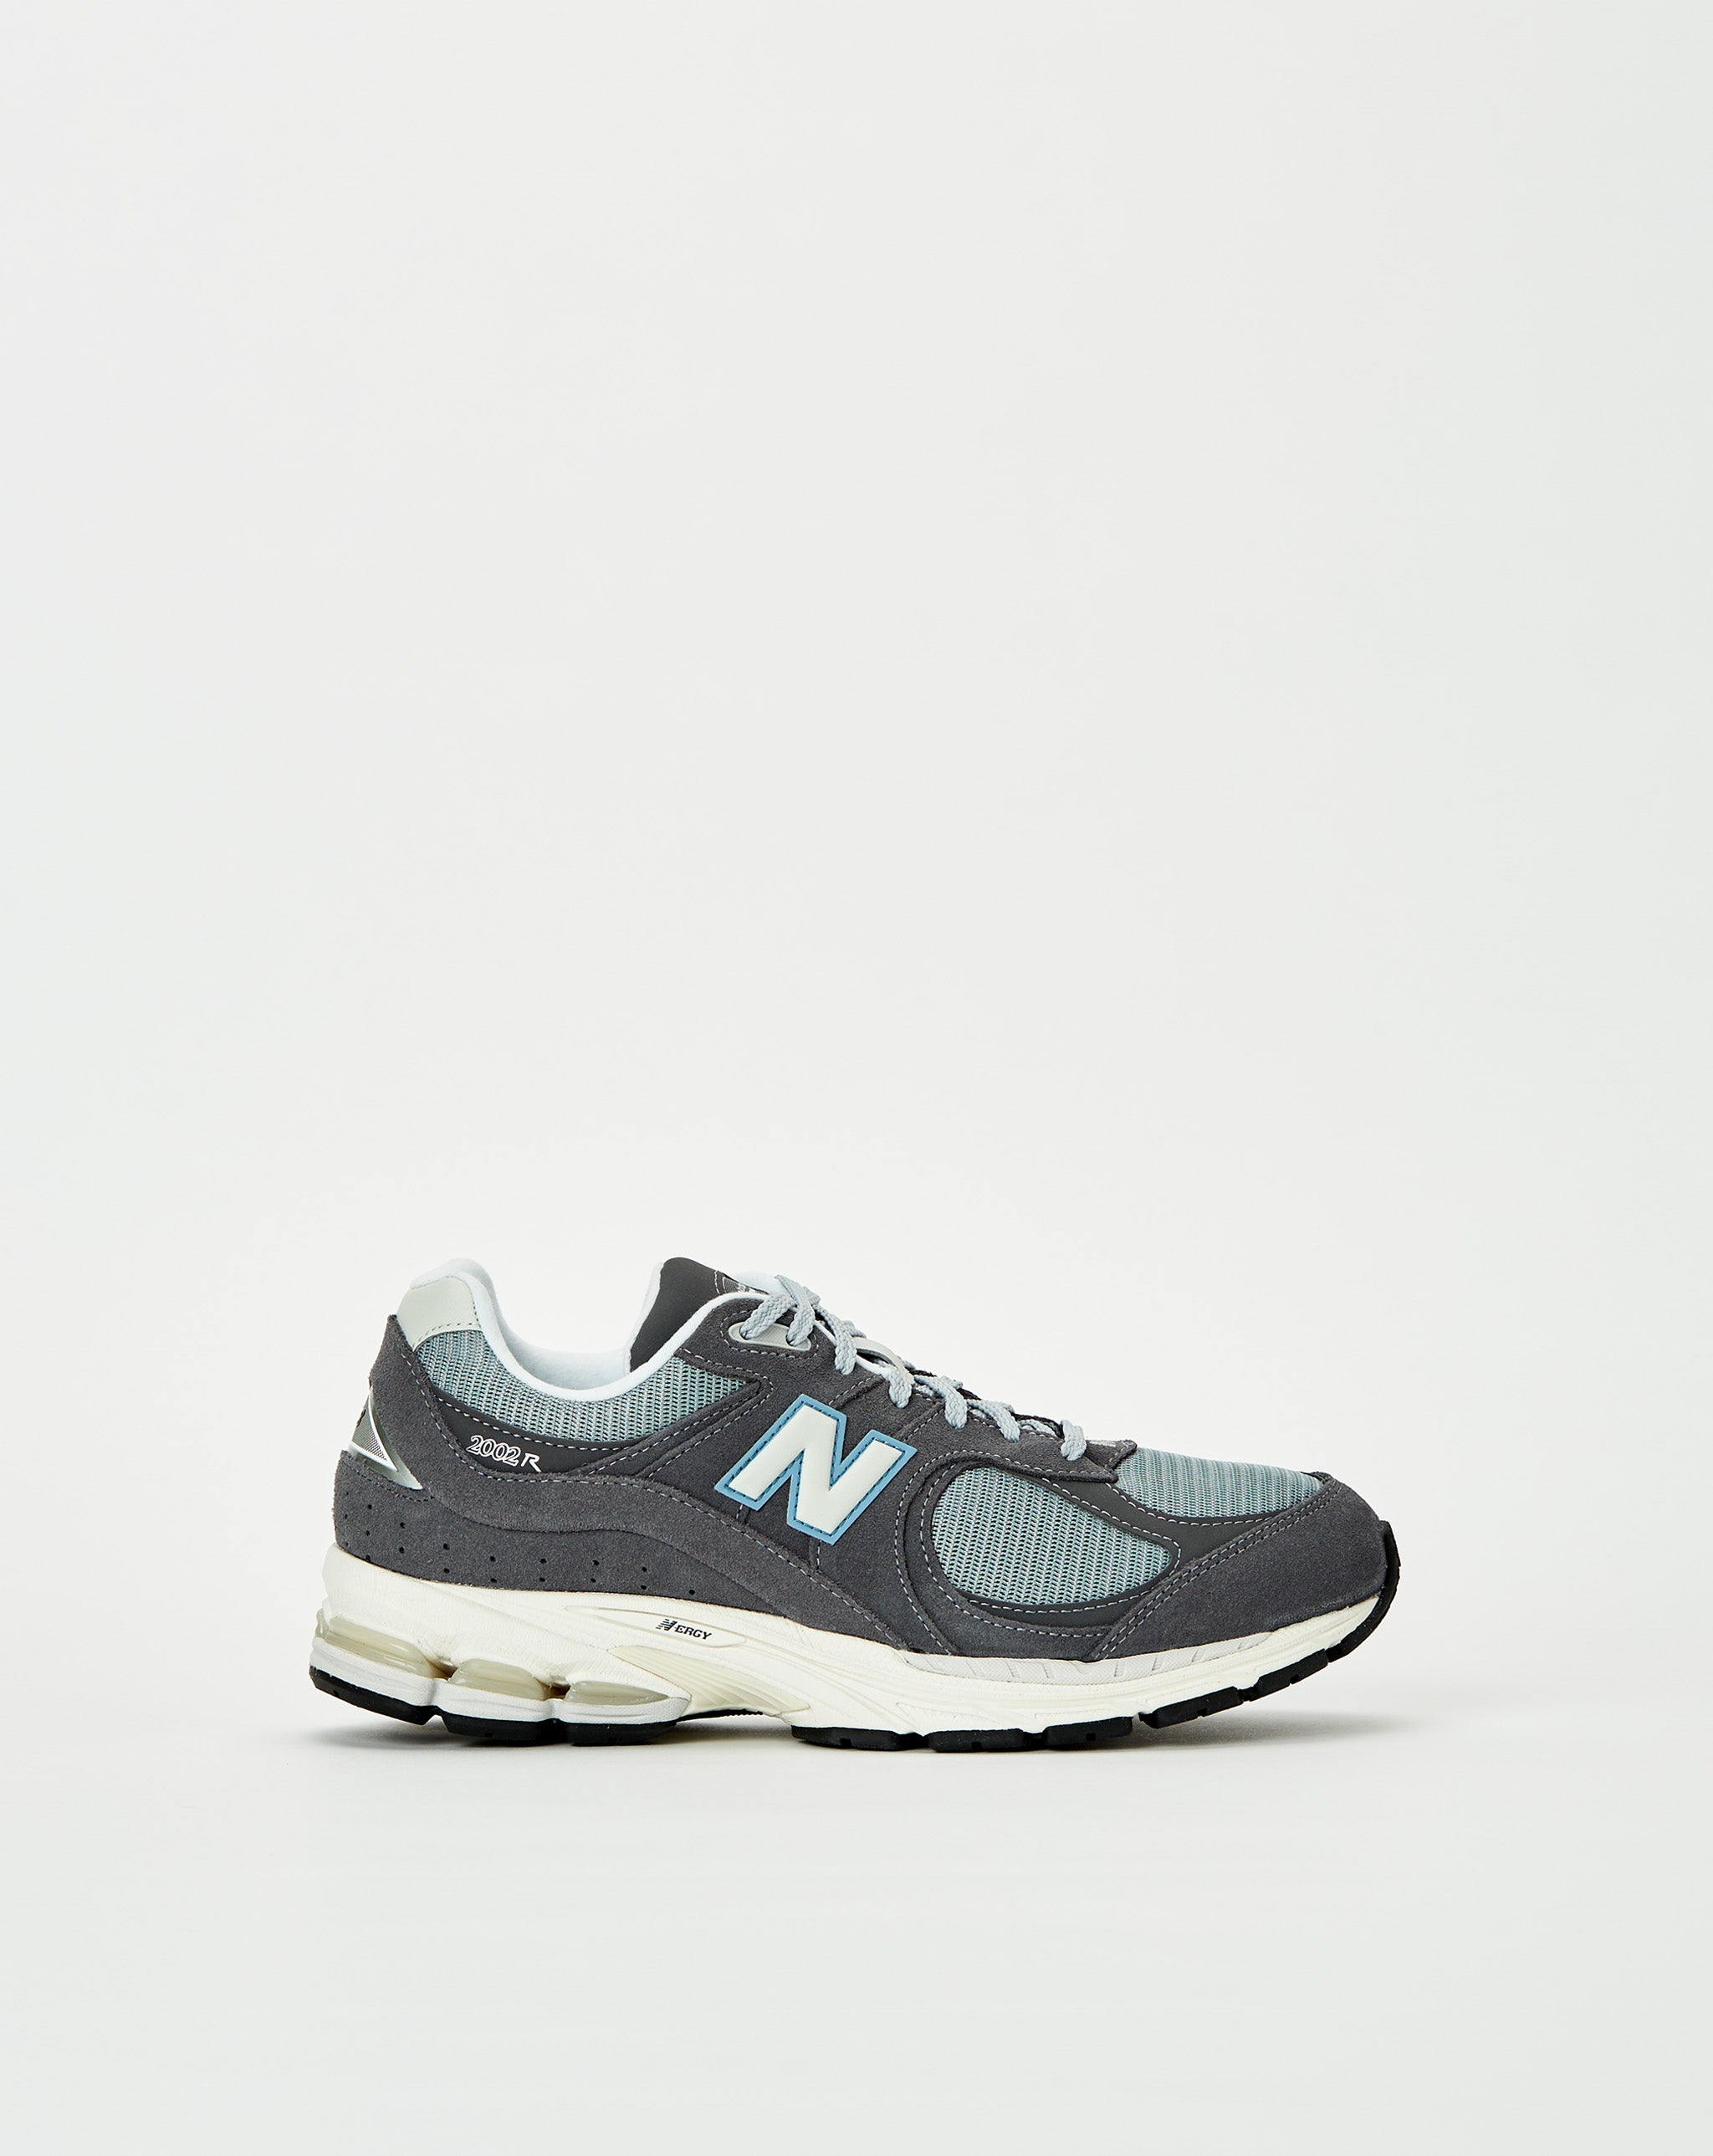 New Balance — Performance Footwear for Active Lifestyles – Xhibition